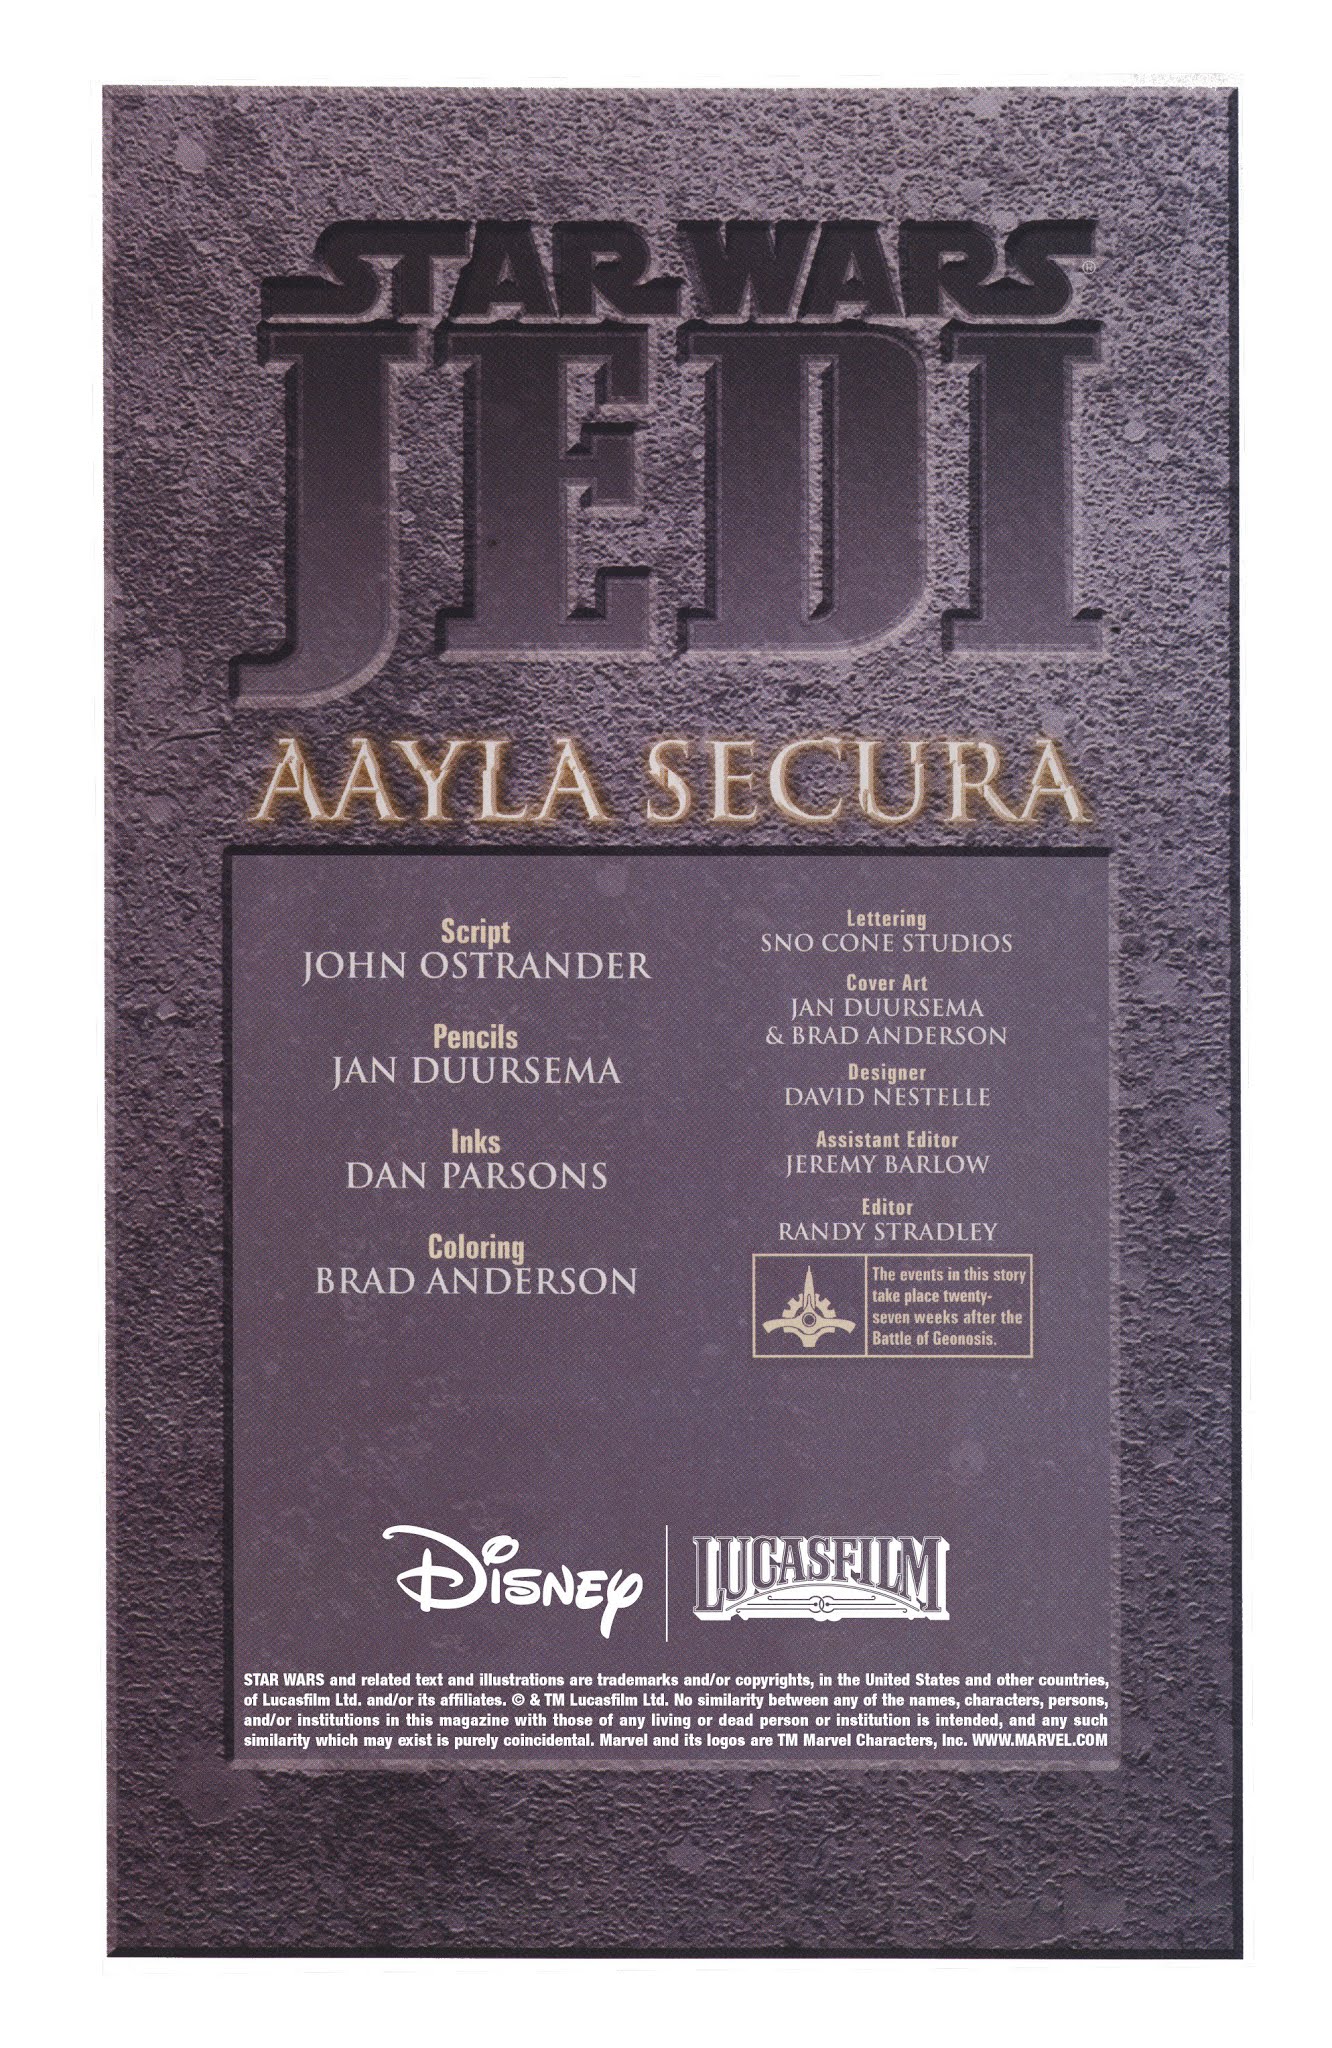 Read online Star Wars: Jedi comic -  Issue # Issue Aayla Secura - 2